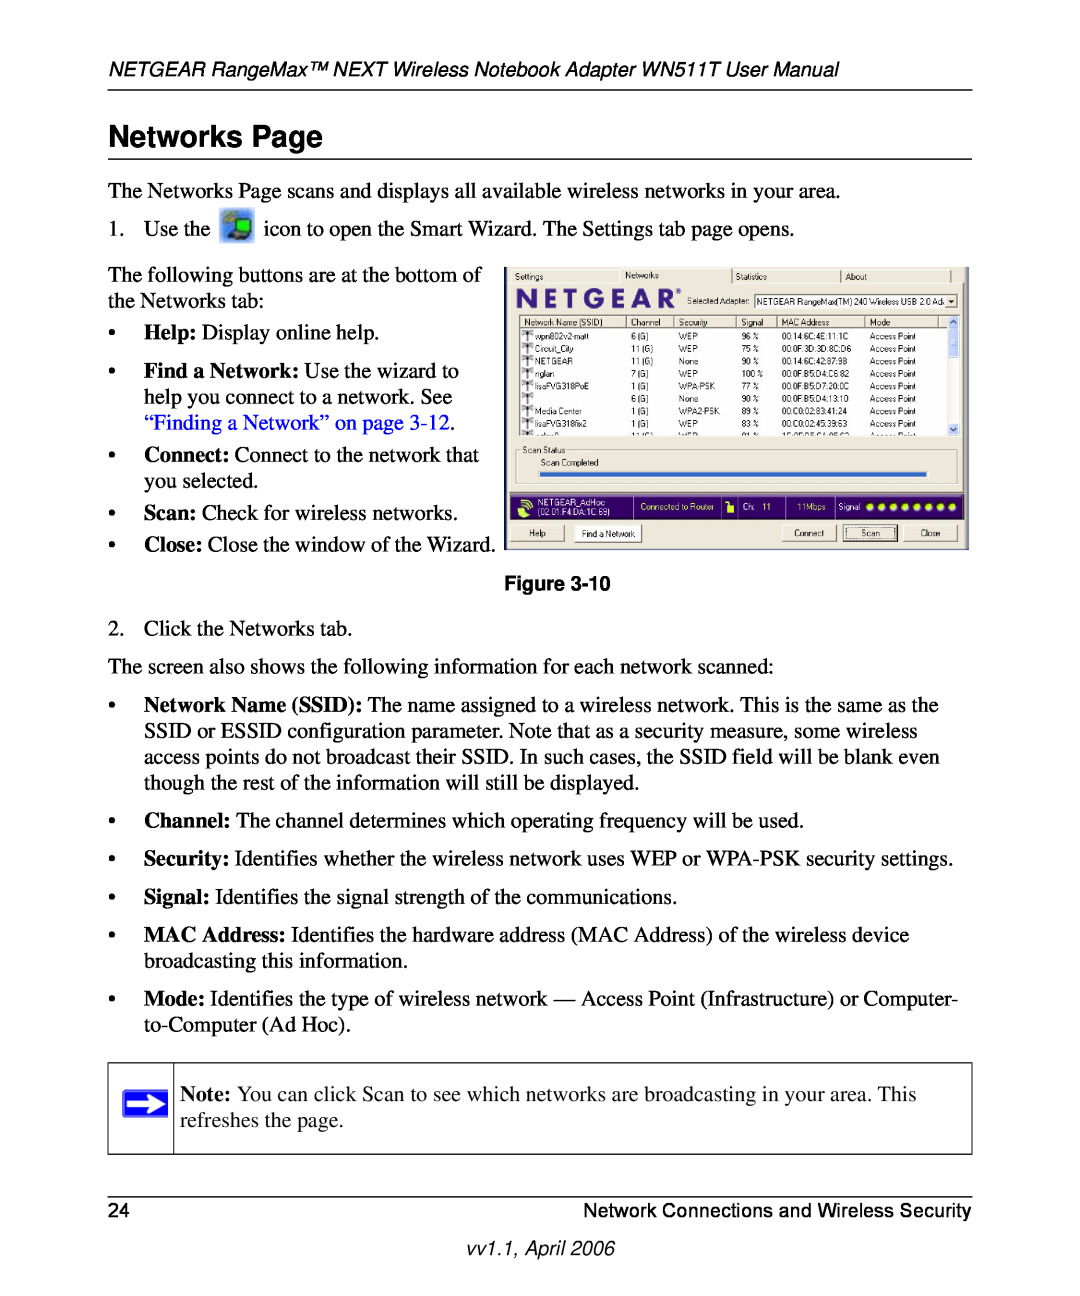 NETGEAR WN511T user manual Networks Page 